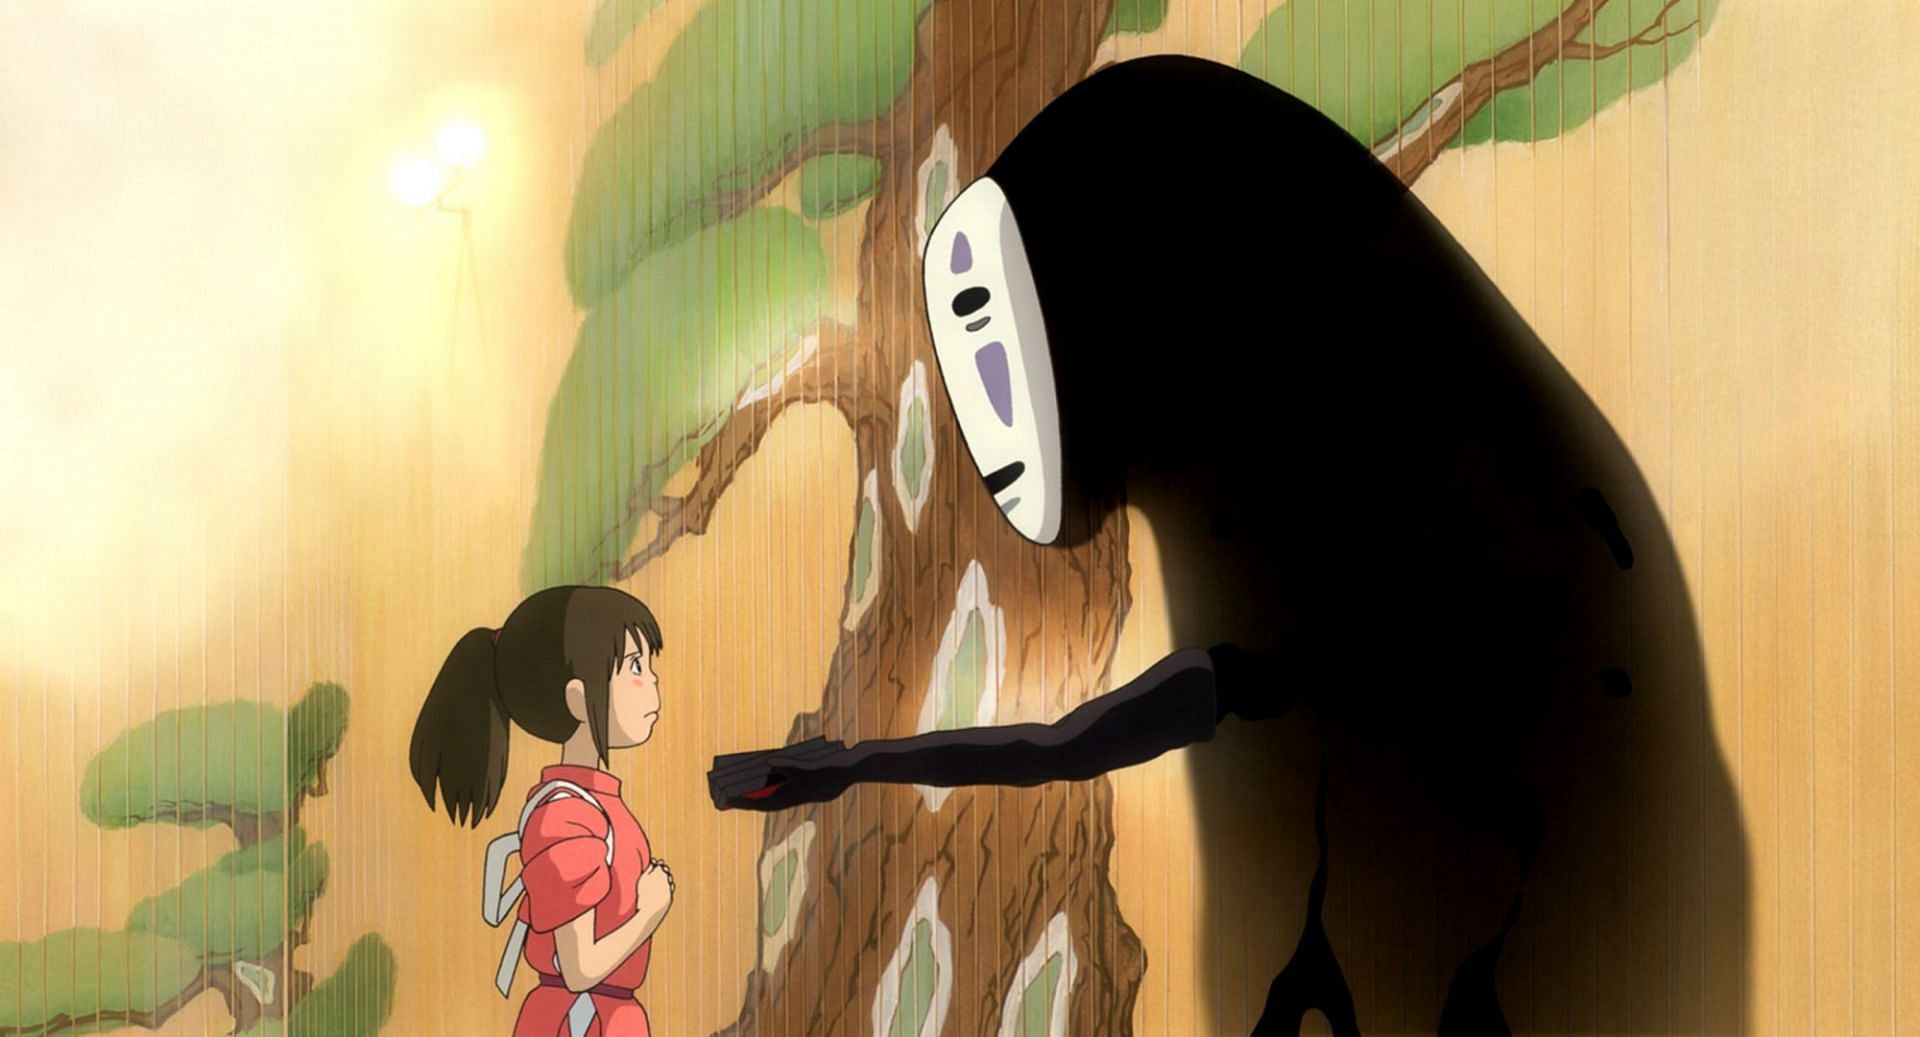 What does the black spirit "No Face" represent in Spirited Away?